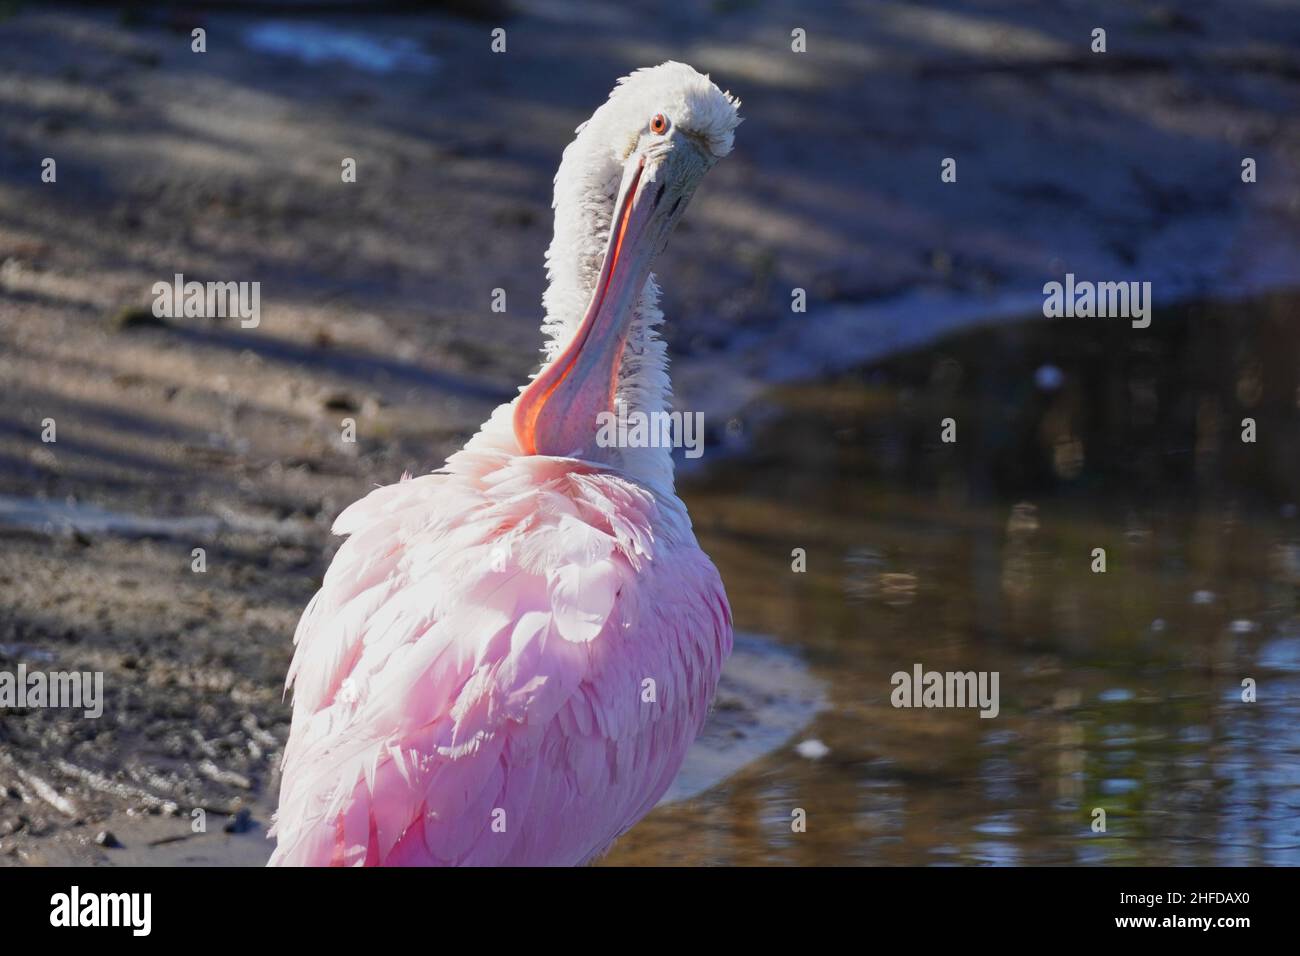 Roseate Spoonbill, Platalea ajaja, standing in shallow water and preening its feathers in marsh land in South Carolina Stock Photo